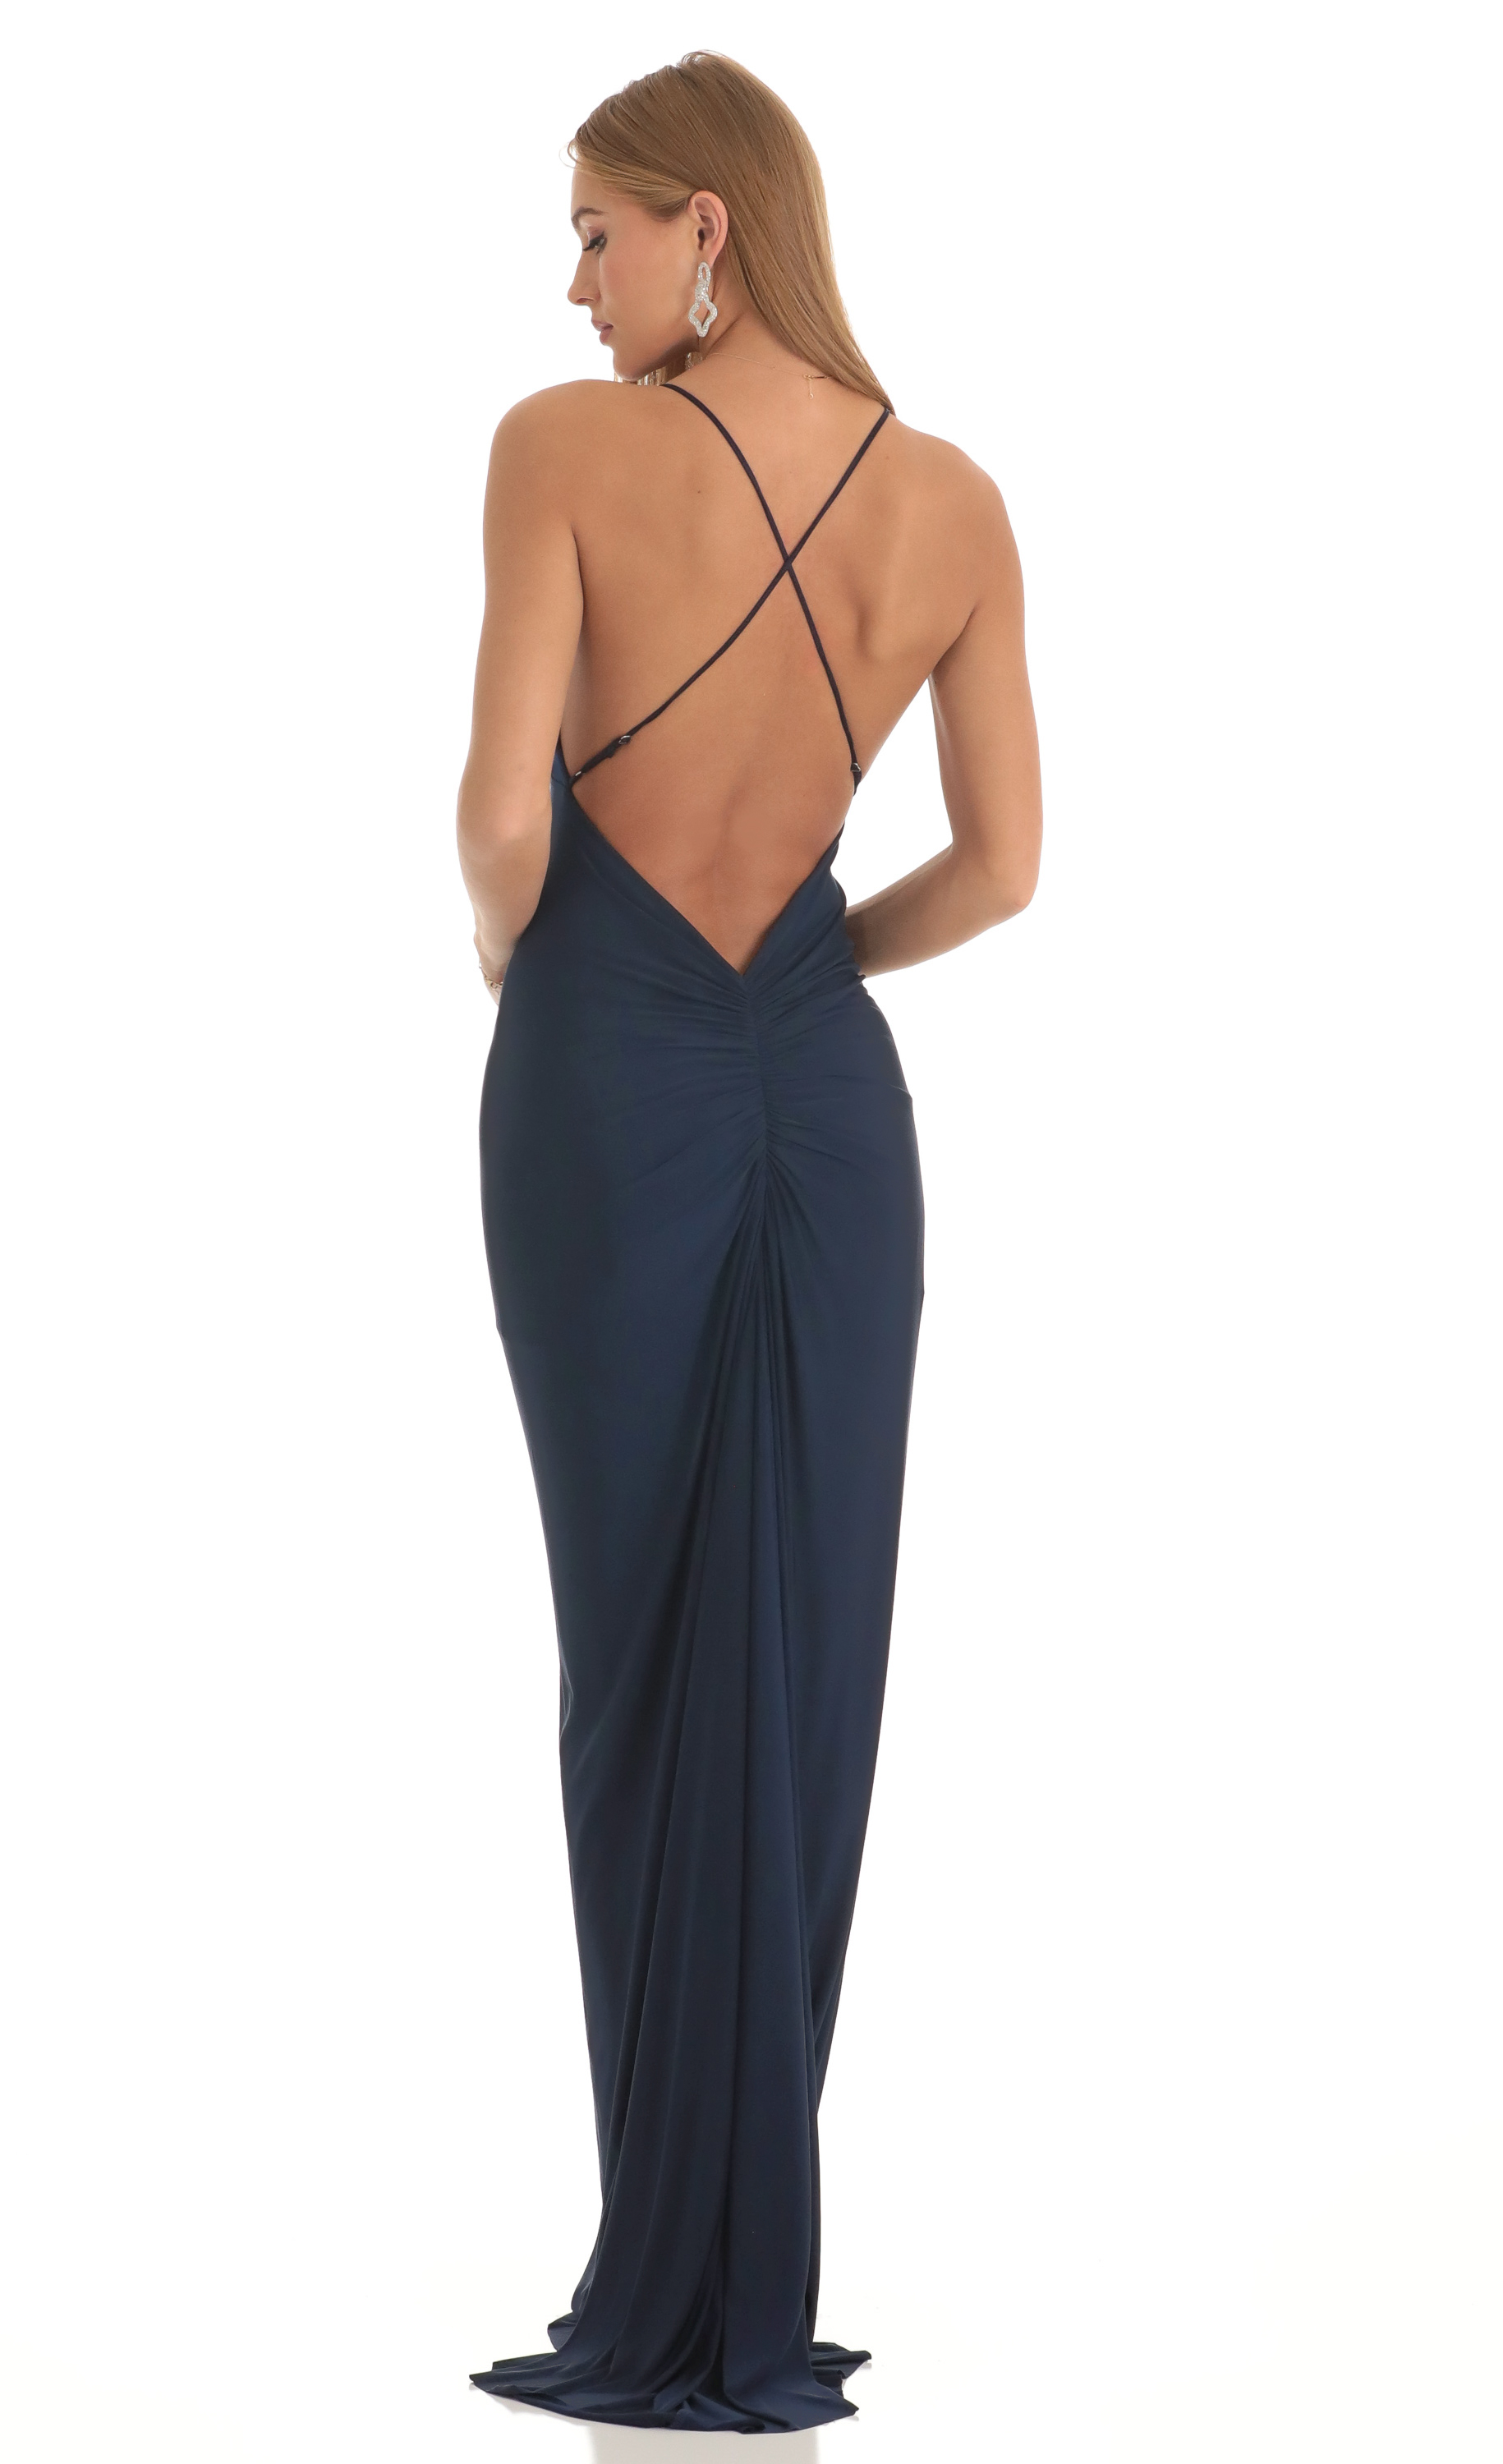 Gathered Cross Back Maxi Dress in Navy